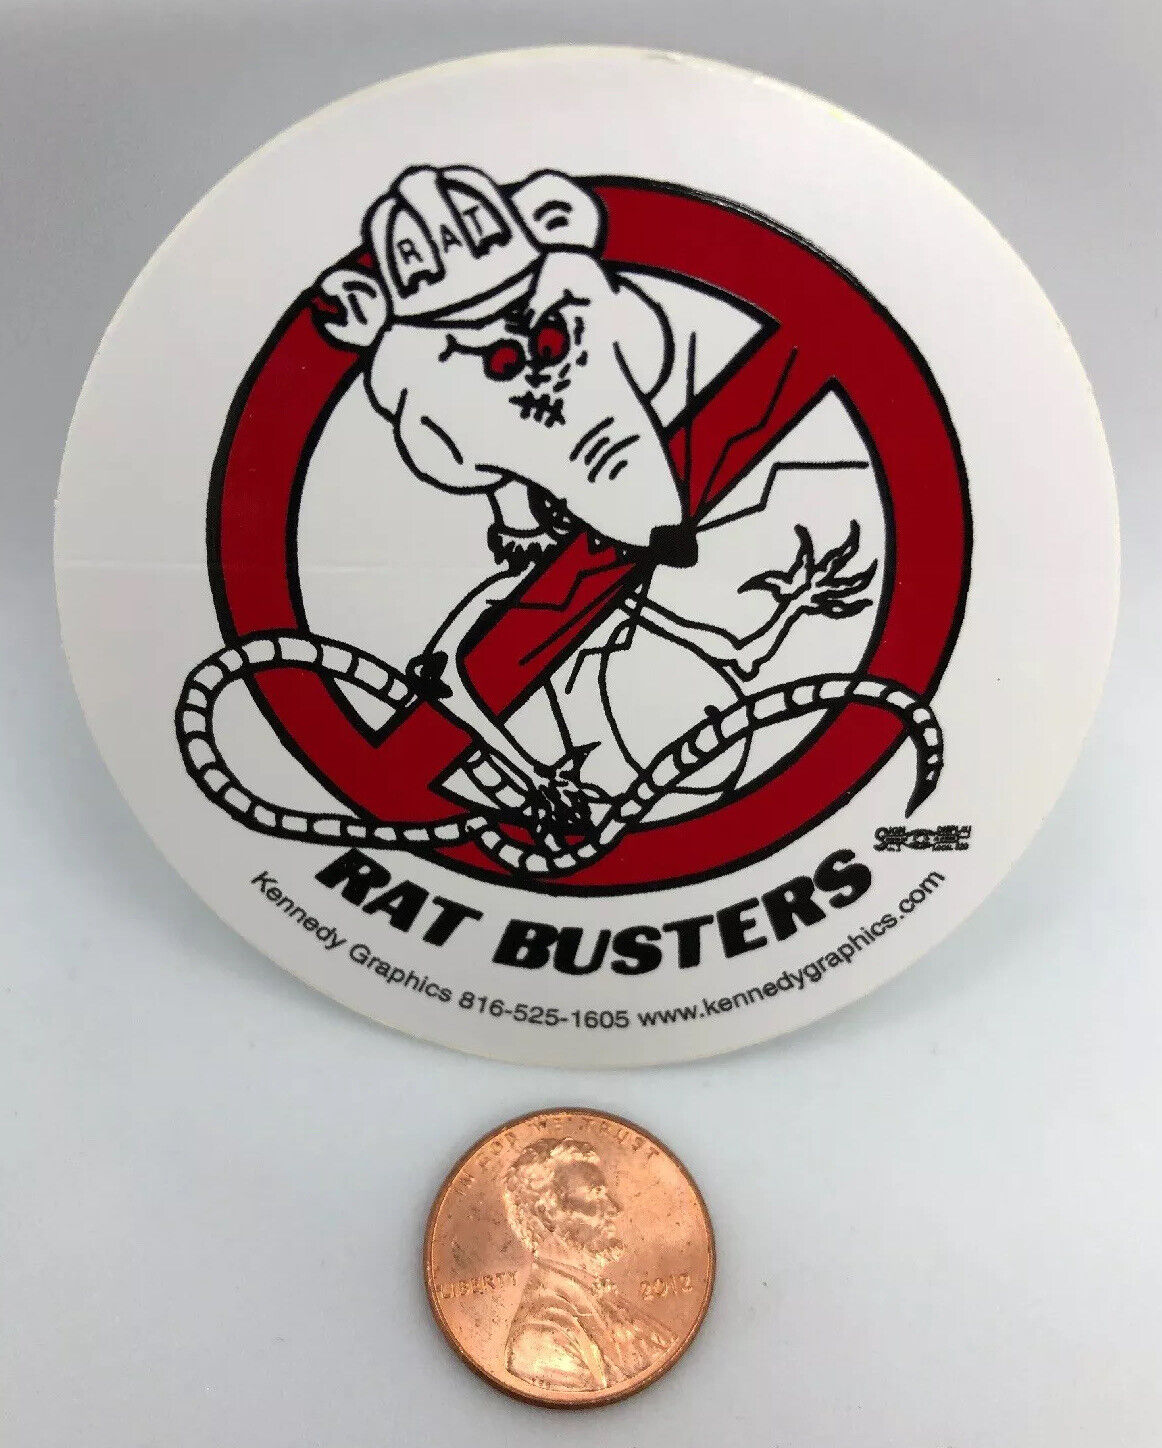 No Rats Rat Busters Organized Labor Union Hard Hat Sticker Decal Funny